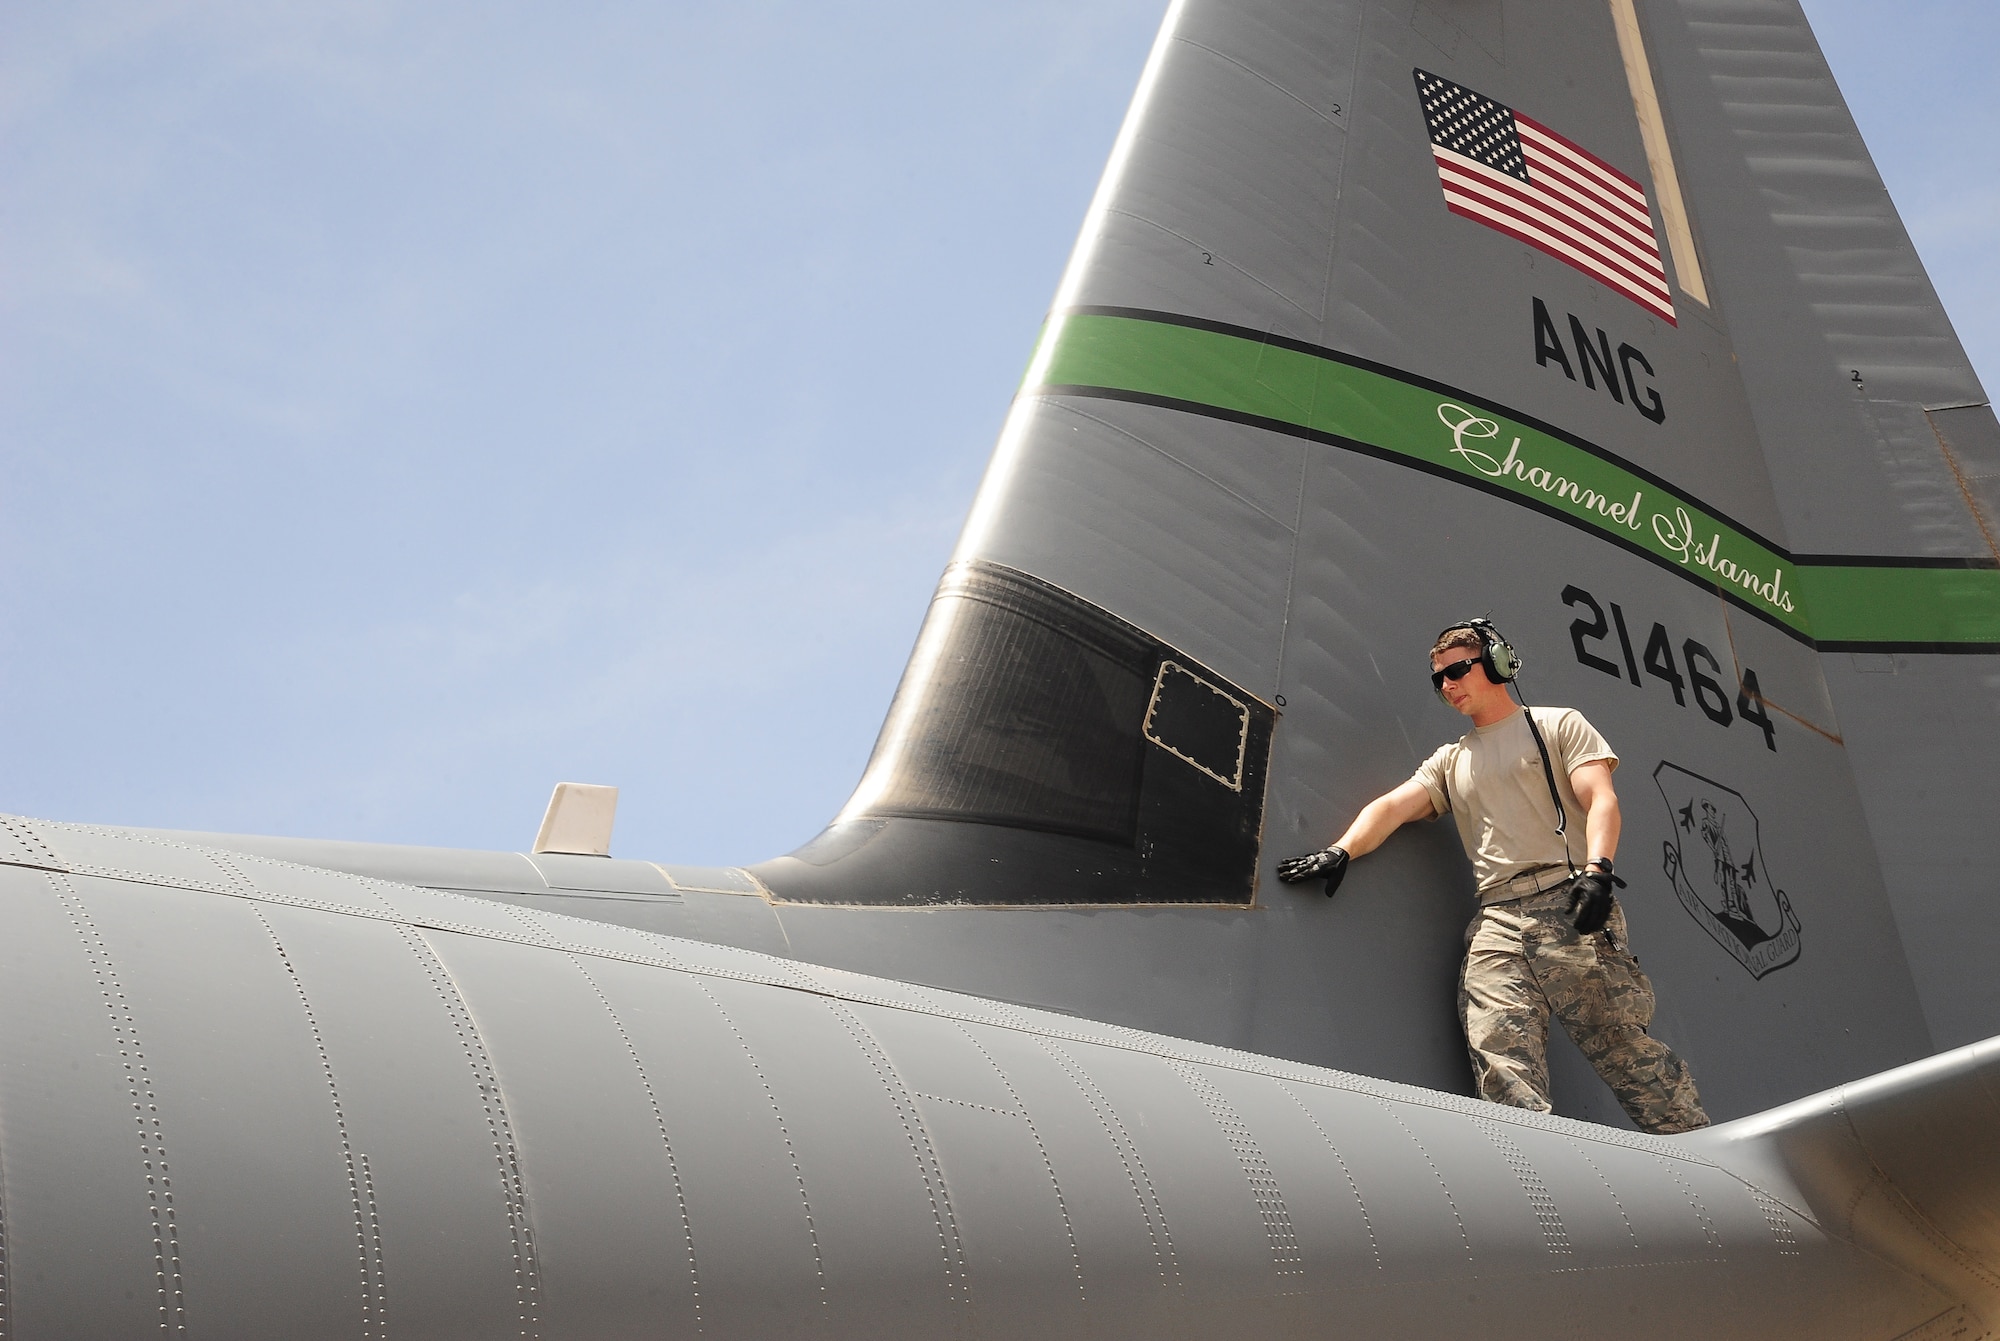 U.S. Air Force Senior Airman Beau Lewis, a crew chief with the 146th Aircraft Maintenance Squadron at Channel Islands Air National Guard Station, Calif., checks the tail of a C-130J Hercules during Exercise Eager Lion May 29, 2014, at an air base in northern Jordan. The over 6,000 U.S. forces participating in Eager Lion include troops from all branches of the U.S. military. (U.S. Air Force photo by Staff Sgt. Brigitte N. Brantley/Released)